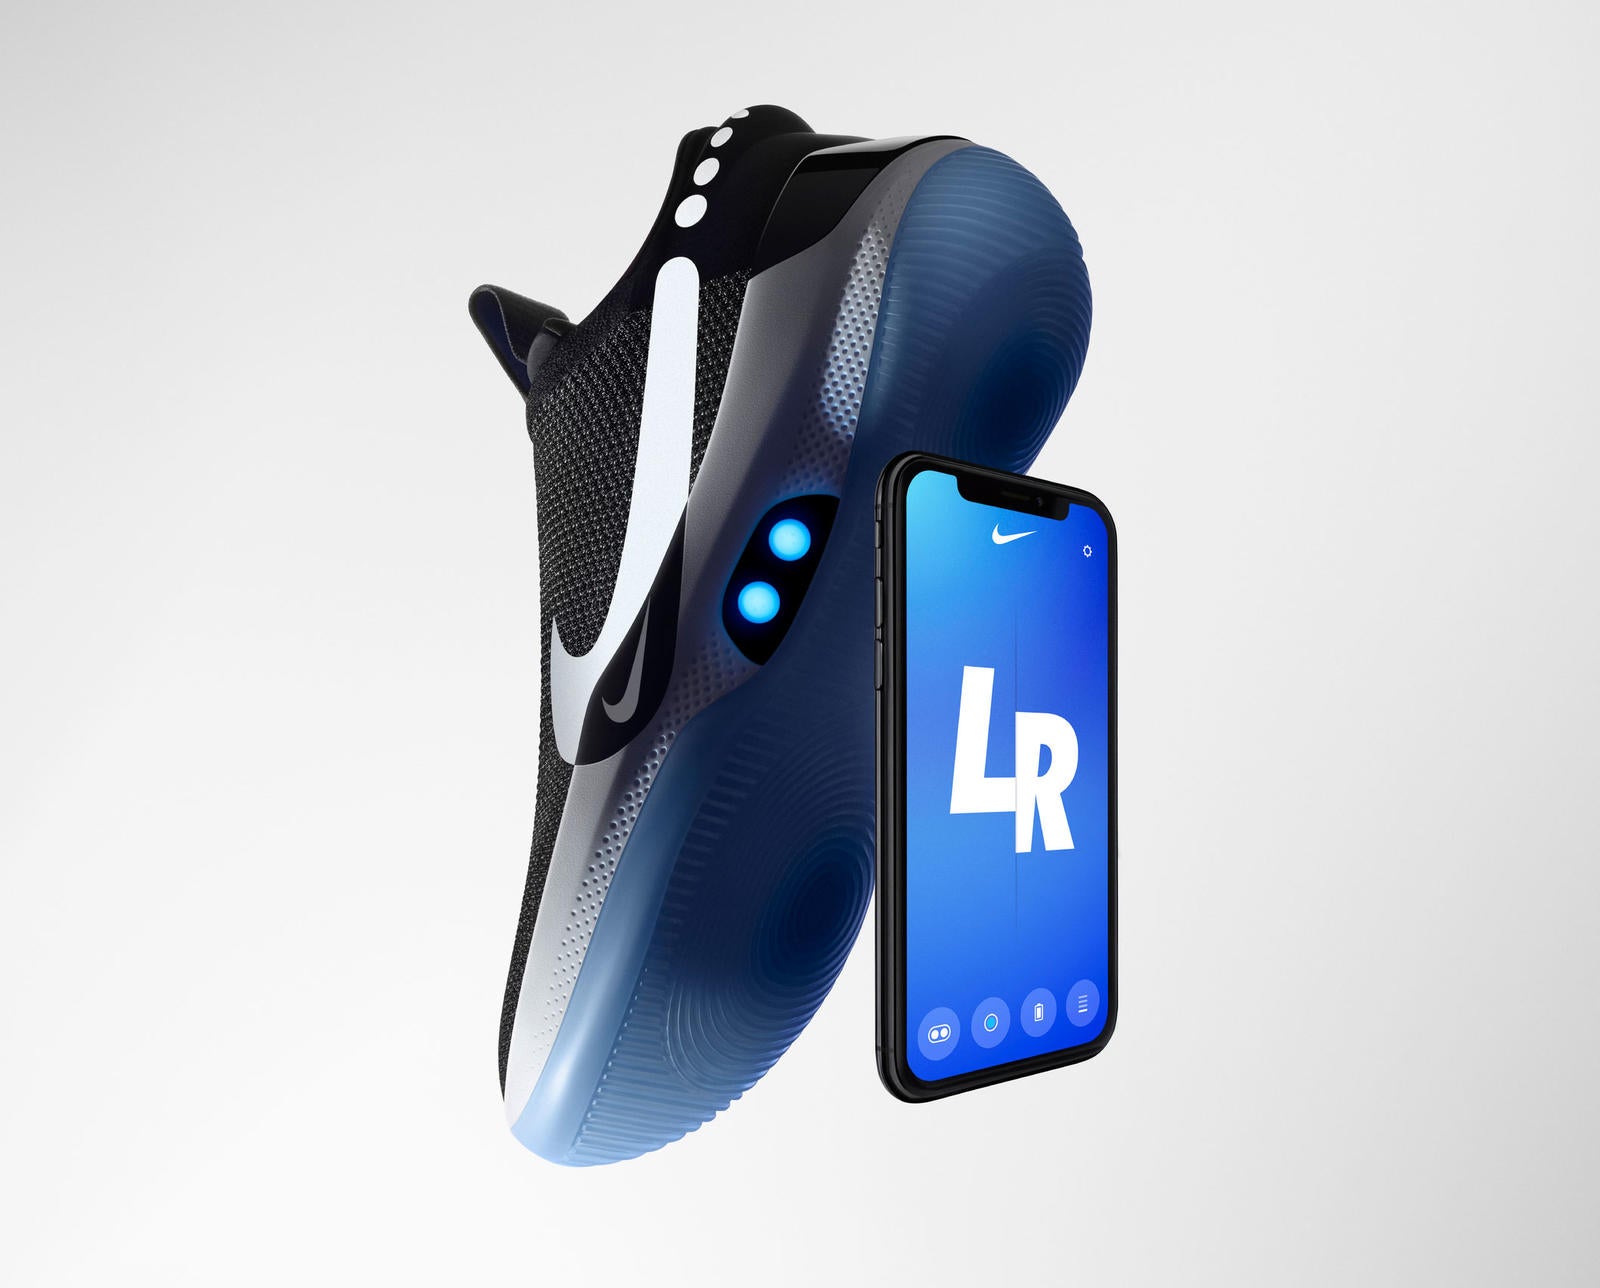 Firmware Updates Bedevil Nike's New Smart Shoes